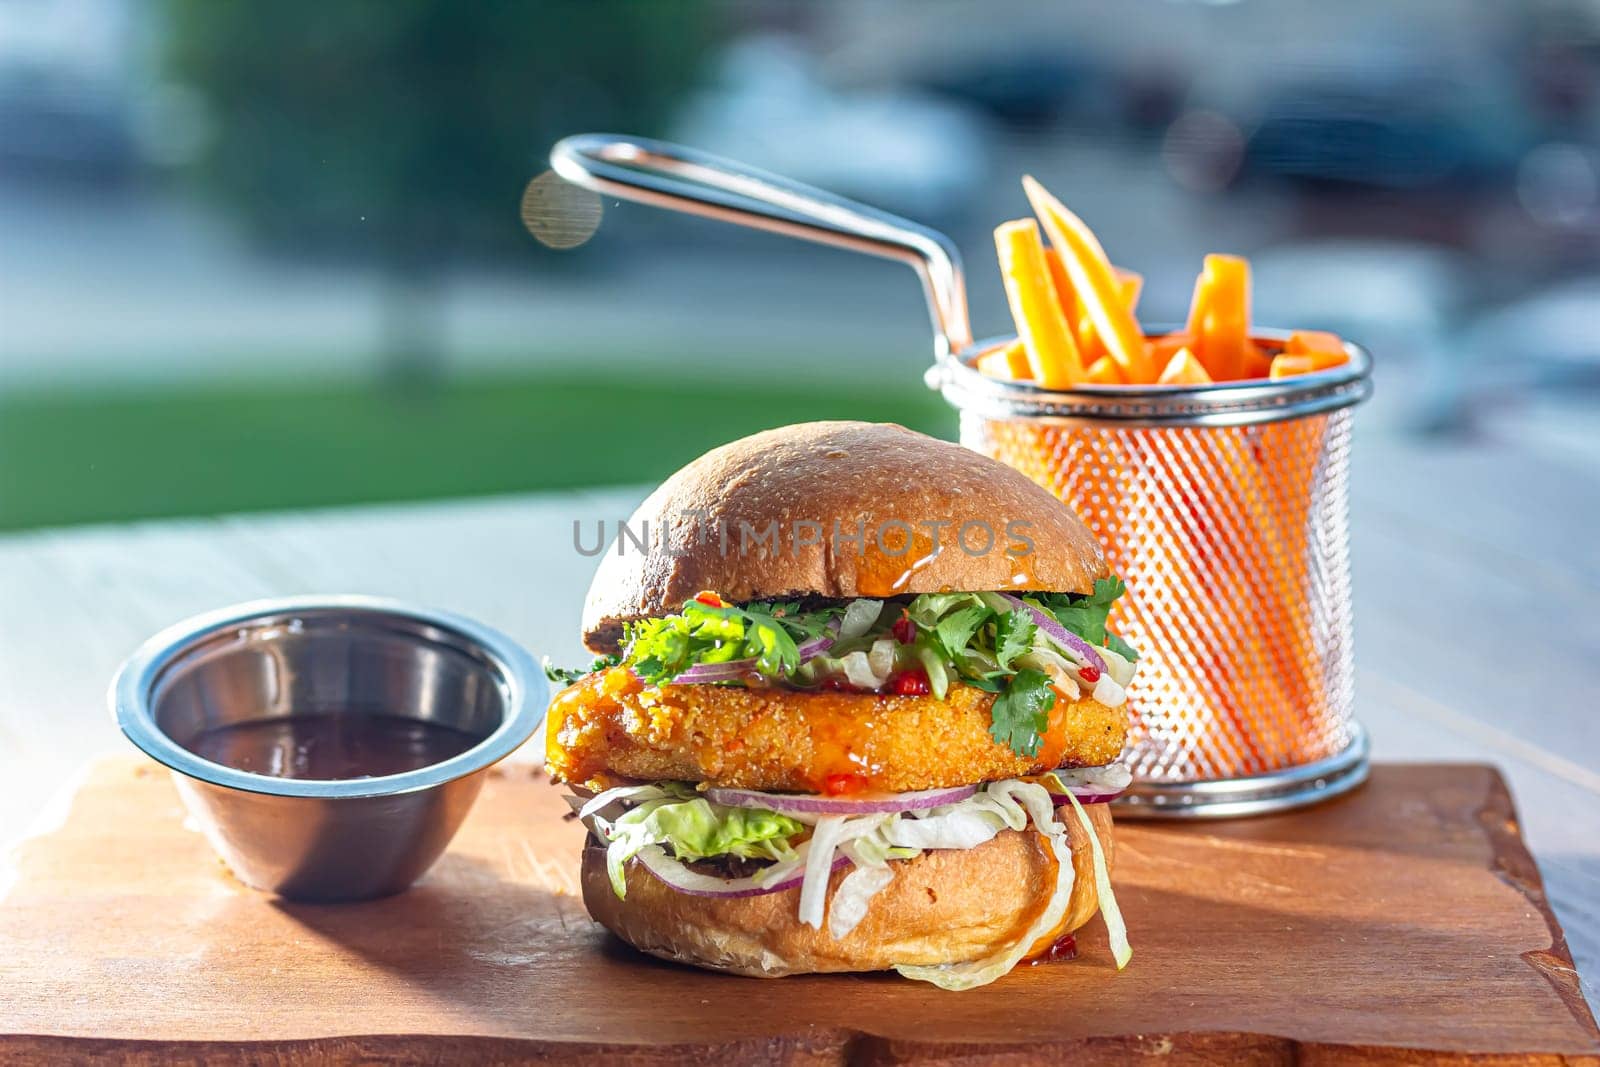 Hamburger with chicken cutlet, fresh tomatoes, red onion, lettuce and tomato sauce. Next to the burger is a metal mold with fries, a metal mold with chili sauce. Burger, fries and sauce are on a brown.